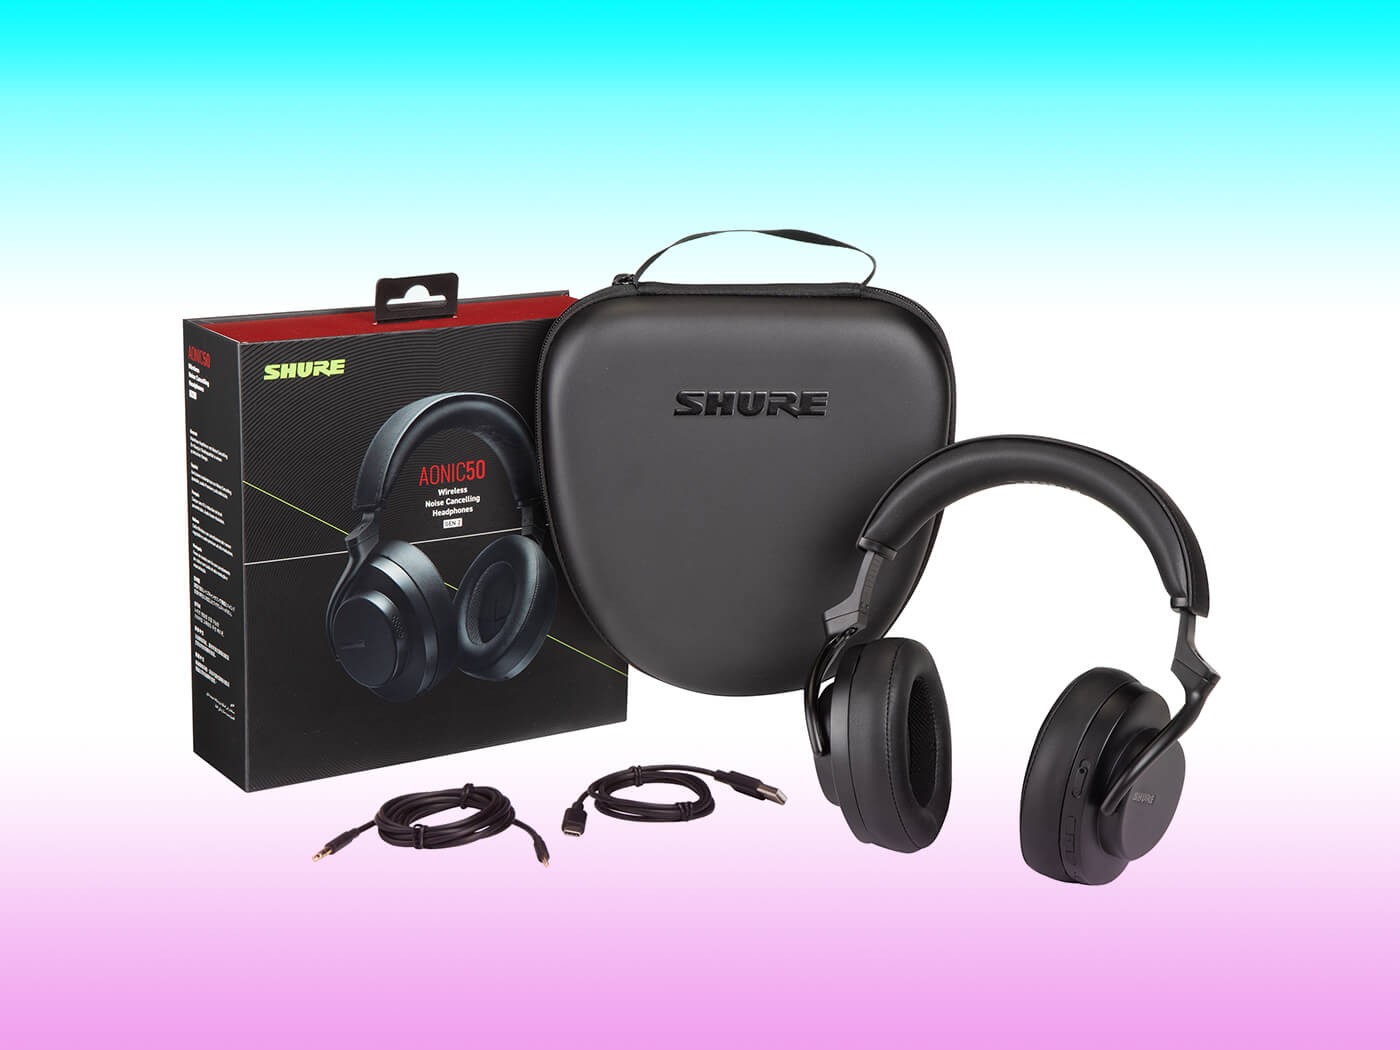 Shure AONIC 50 Gen 2 headphones with their case, box and wires